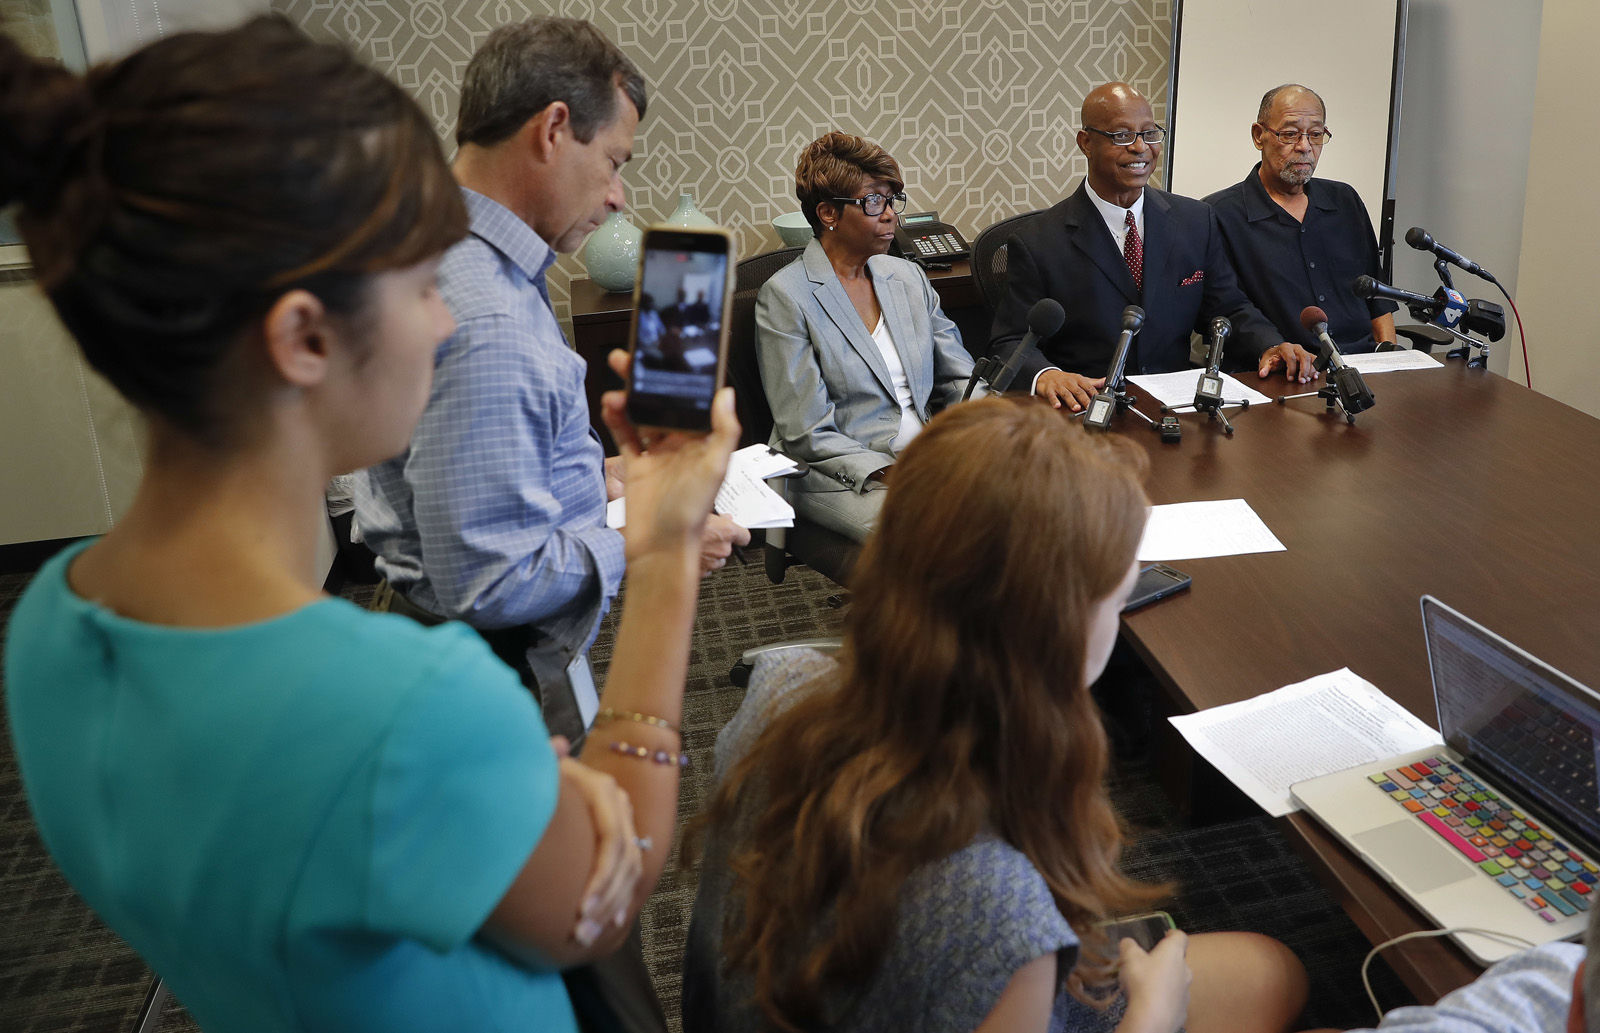 Attorney Ted Williams, right center, for Barbara, center, and Phillip Butler, right, victims of a cross burning on their property forty years ago, speaks during a news conference at Williams office in Washington, Wednesday, Aug. 23, 2017. Forty years ago, Catholic Priest William Aitcheson, was a Ku Klux Klan "wizard", has come forward after decades as a Catholic priest, he's coming forward about his past. (AP Photo/Pablo Martinez Monsivais)